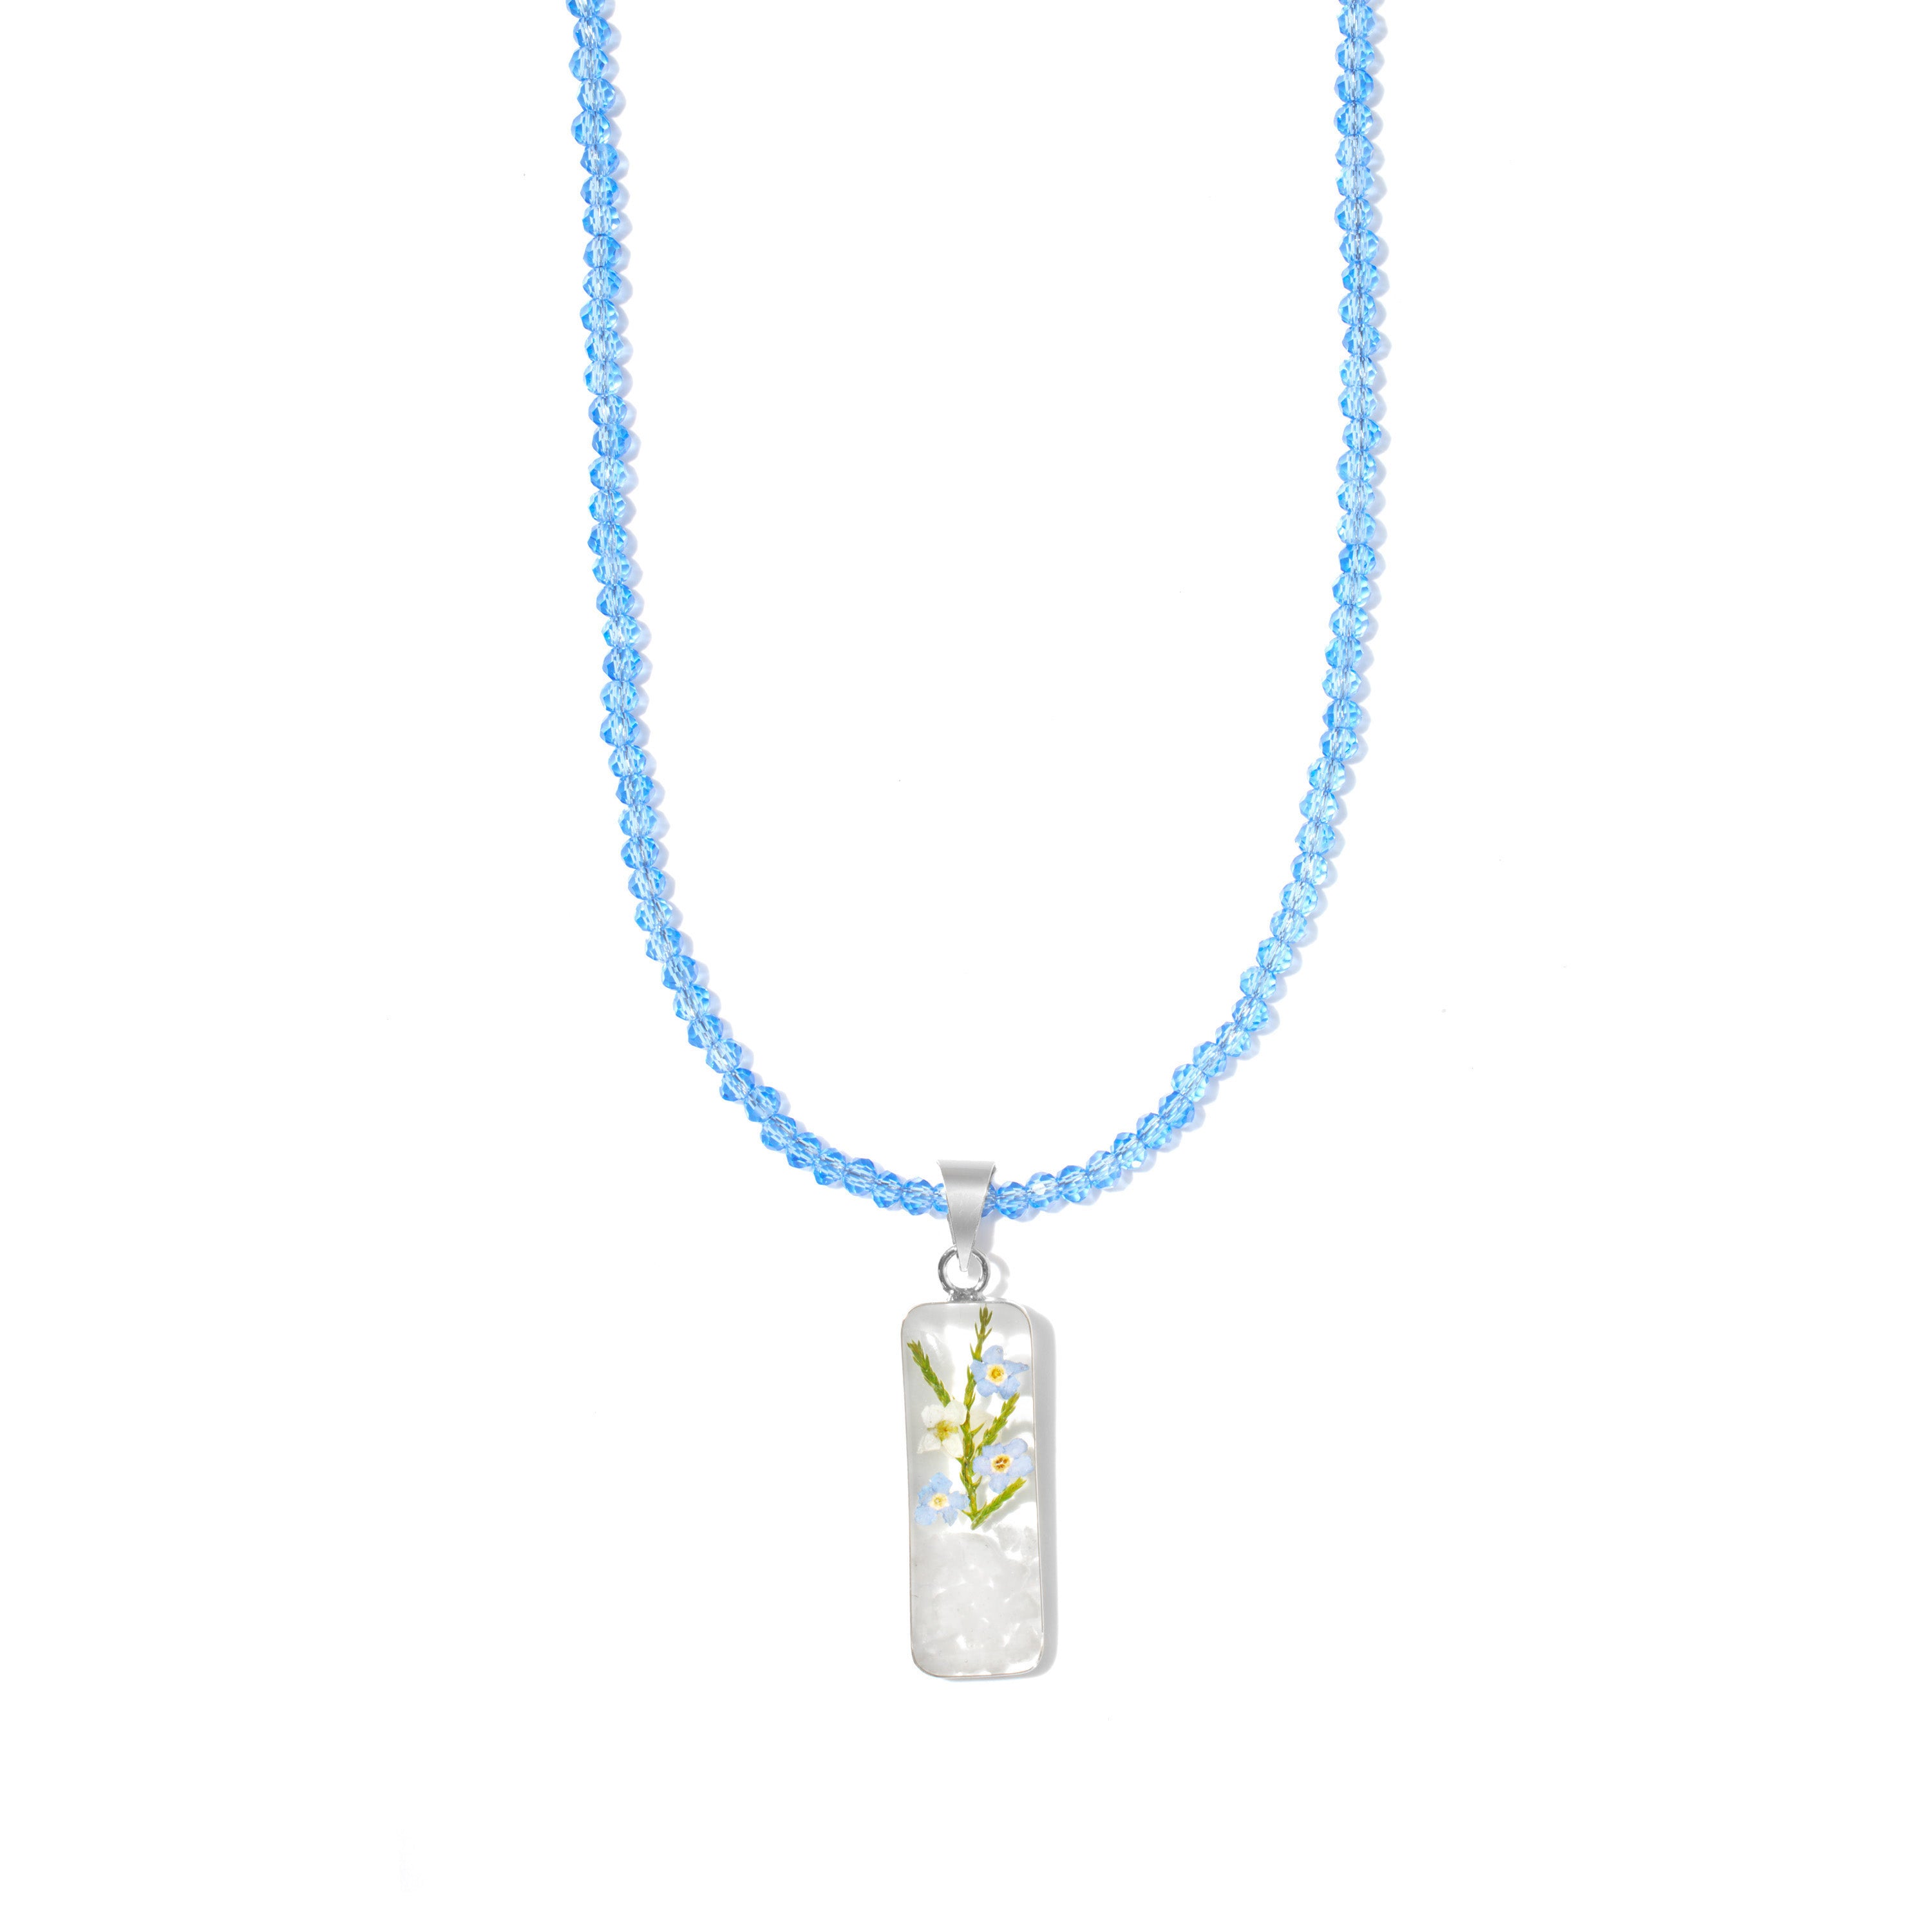 Whispering Blues Necklace